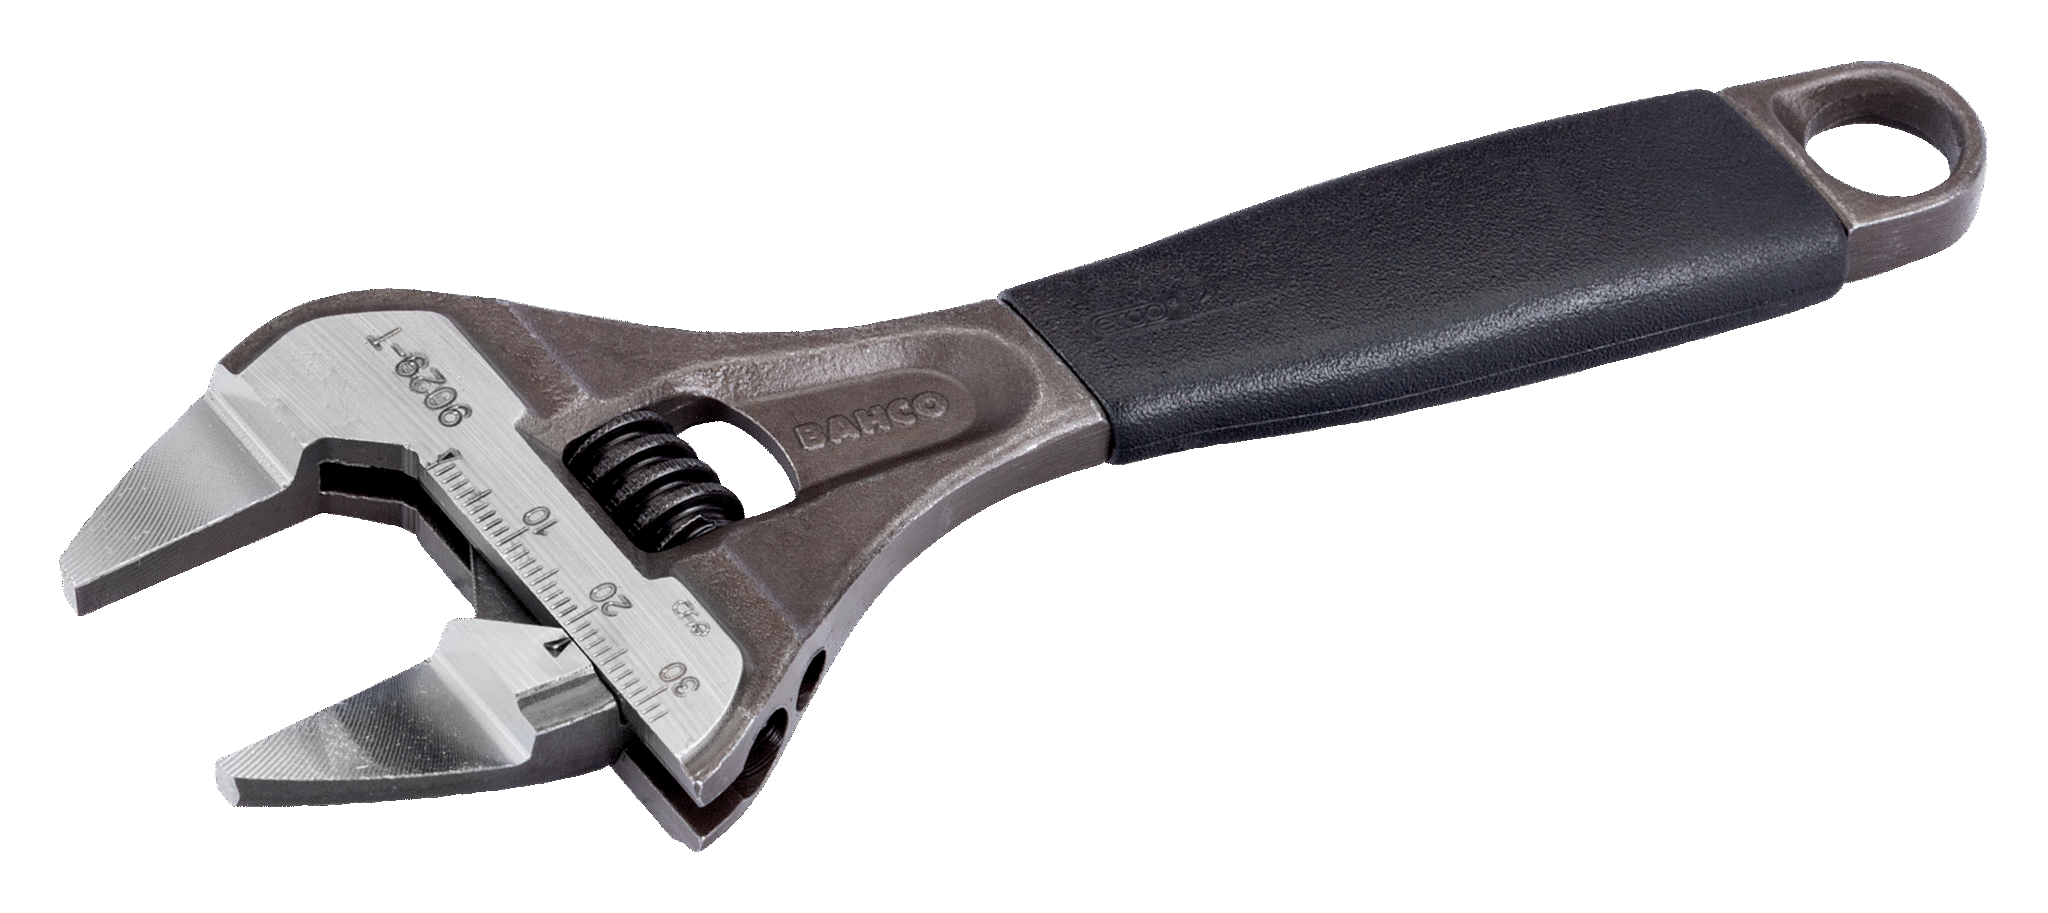 ERGO™ Central Nut Wide Opening Thin Jaw Adjustable Wrenches with Rubber Handle - 9029-T by Bahco